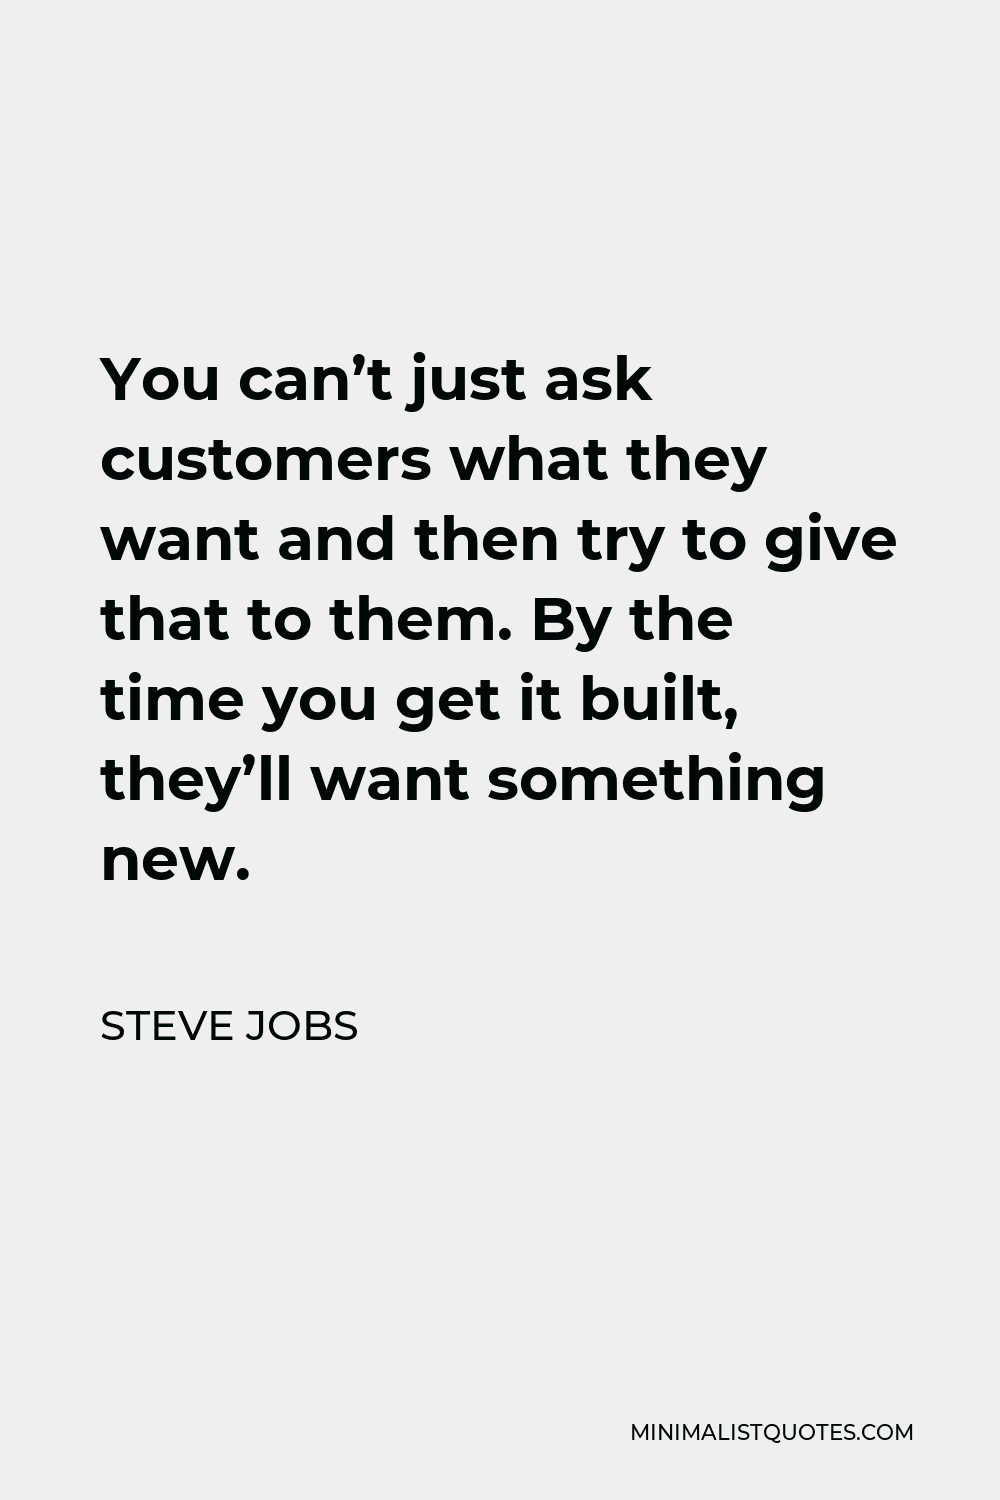 Steve Jobs Quote - You can’t just ask customers what they want and then try to give that to them. By the time you get it built, they’ll want something new.